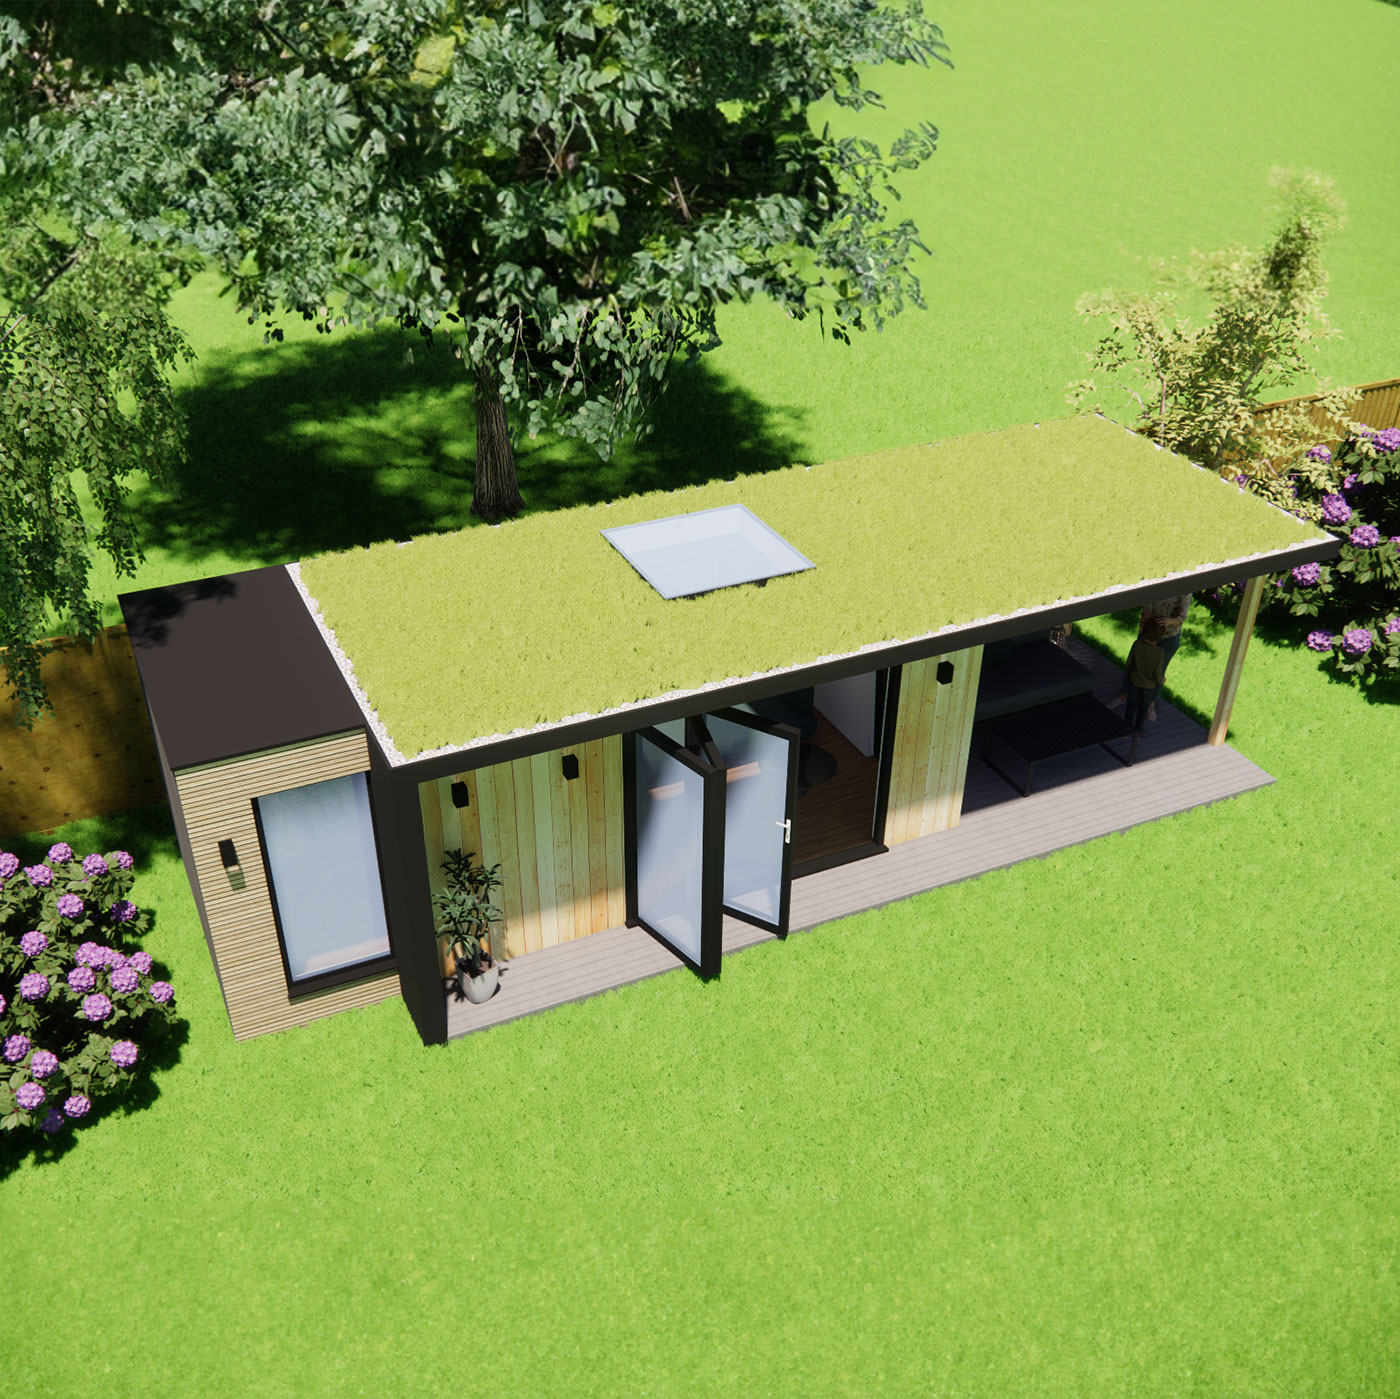 Garden room design with green roof and skylight 2.6m by 6.2m